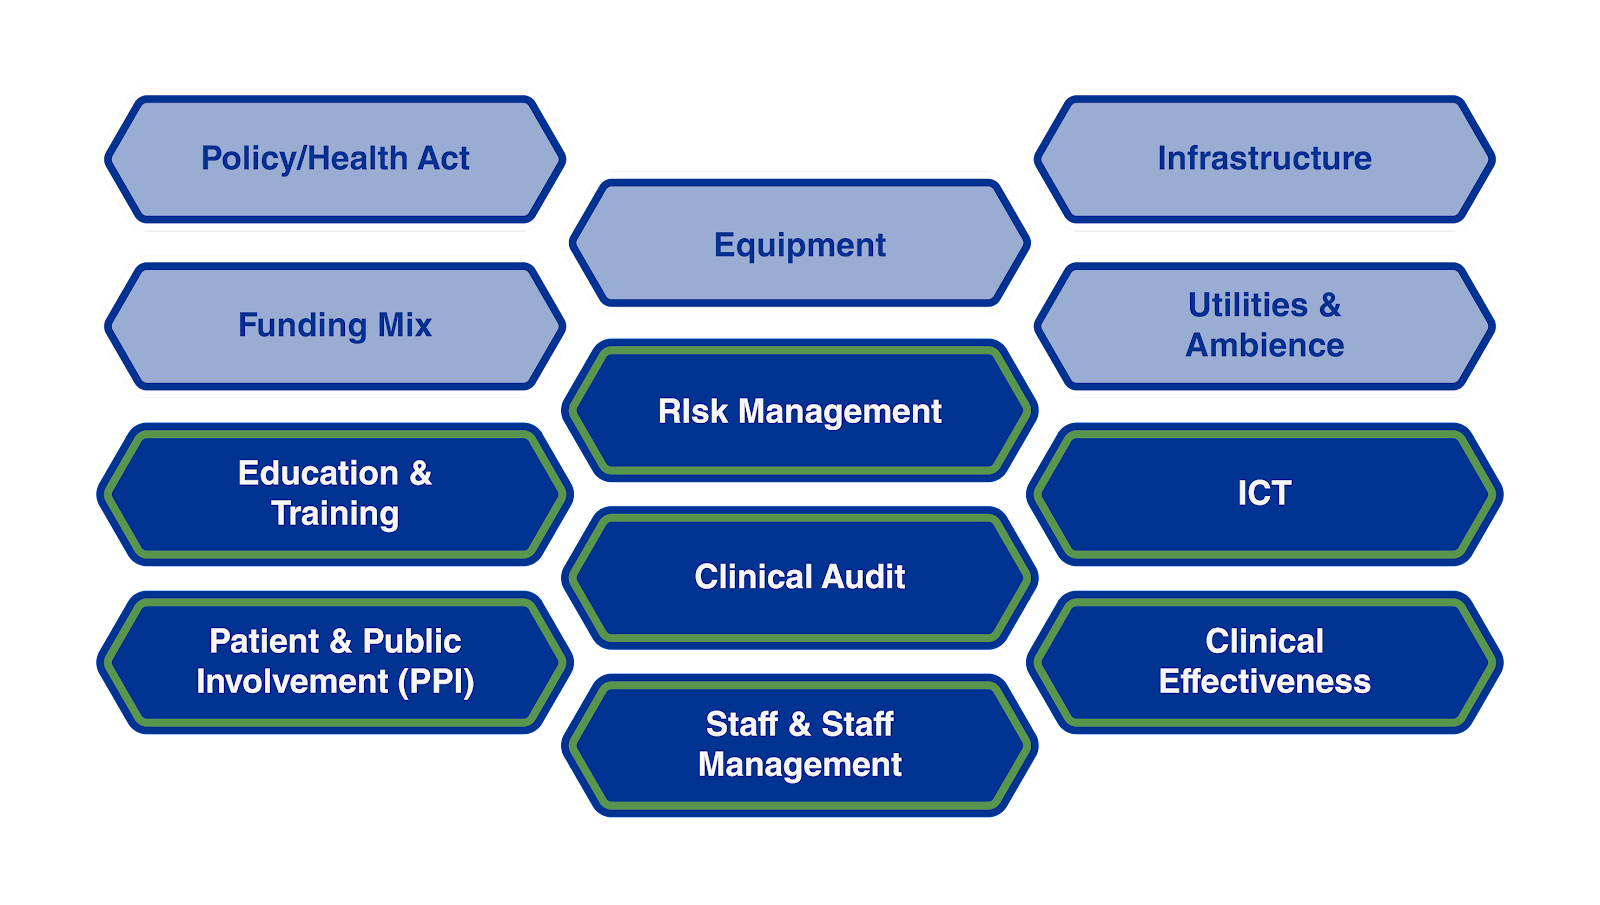 BRIEF INTRODUCTION OF THE 12-PILLARS OF THE CLINICAL GOVERNANCE PROGRAMME